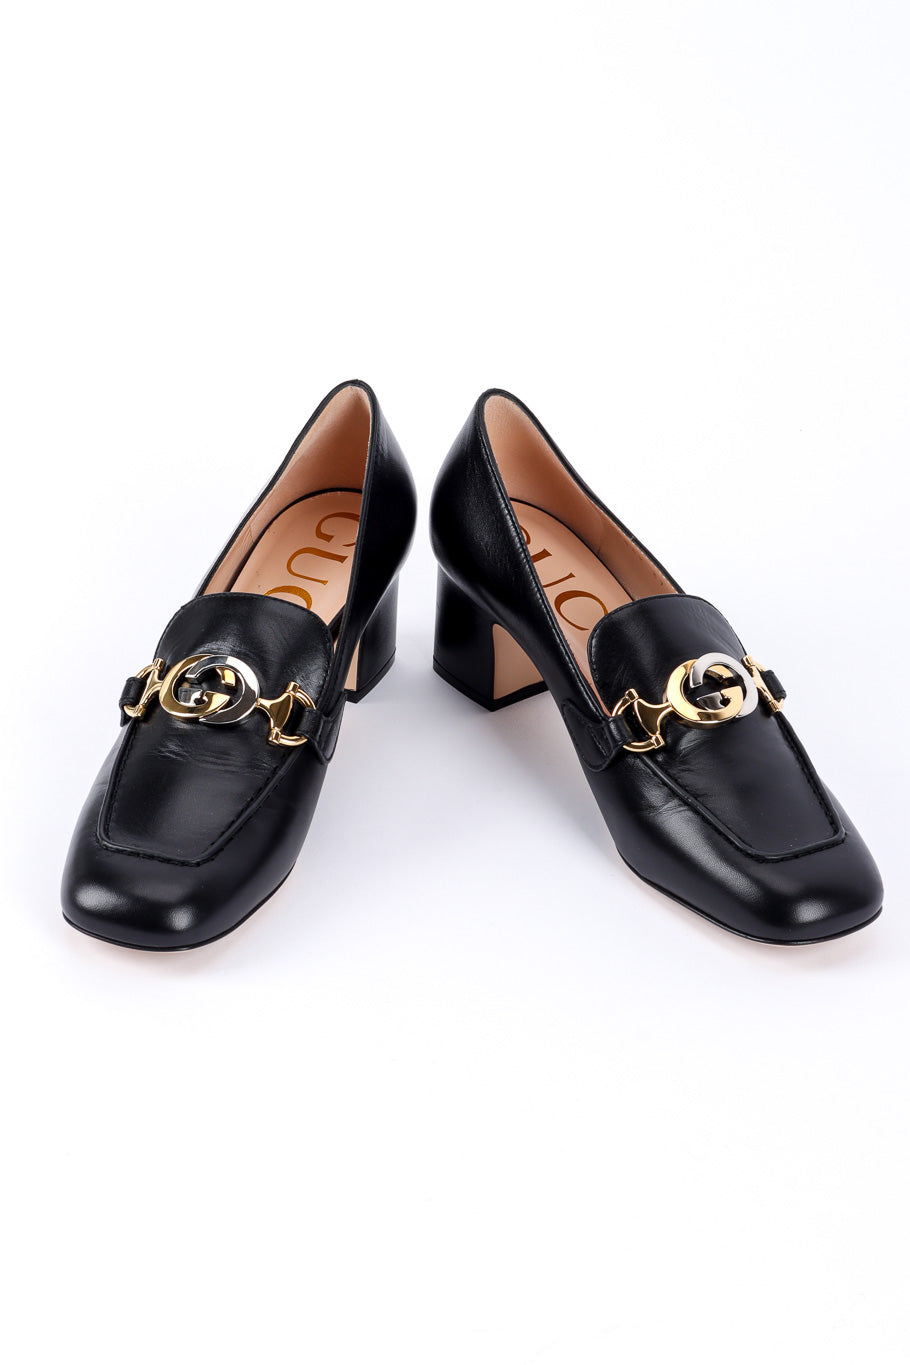 Horsebit loafers by Gucci on white background @recessla